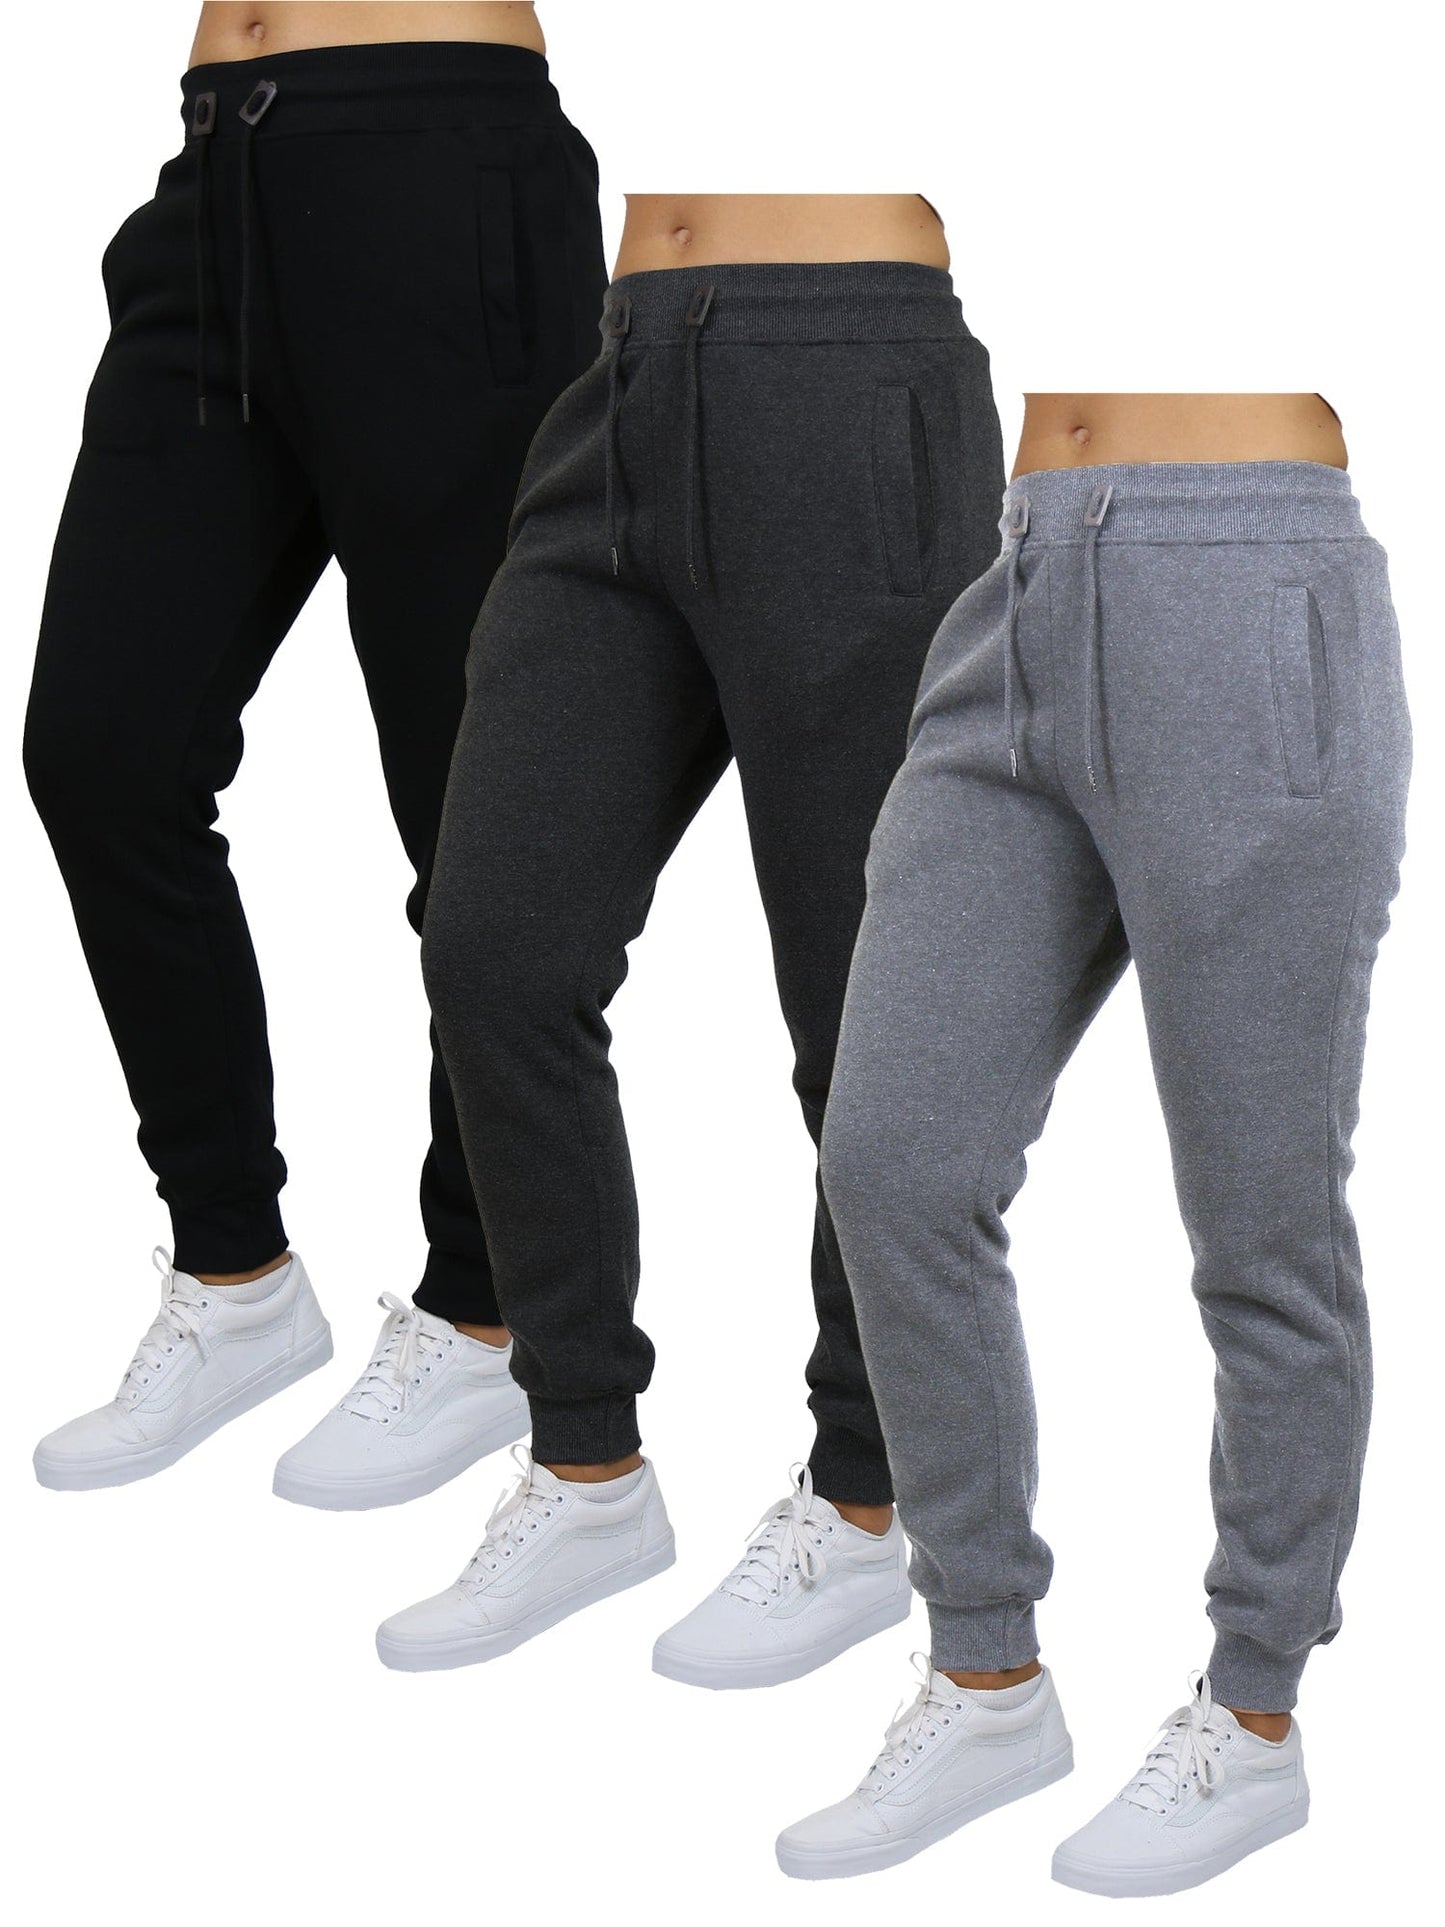 Chiccall Men's Plus Size Fleece Joggers Pants with Deep Pockets